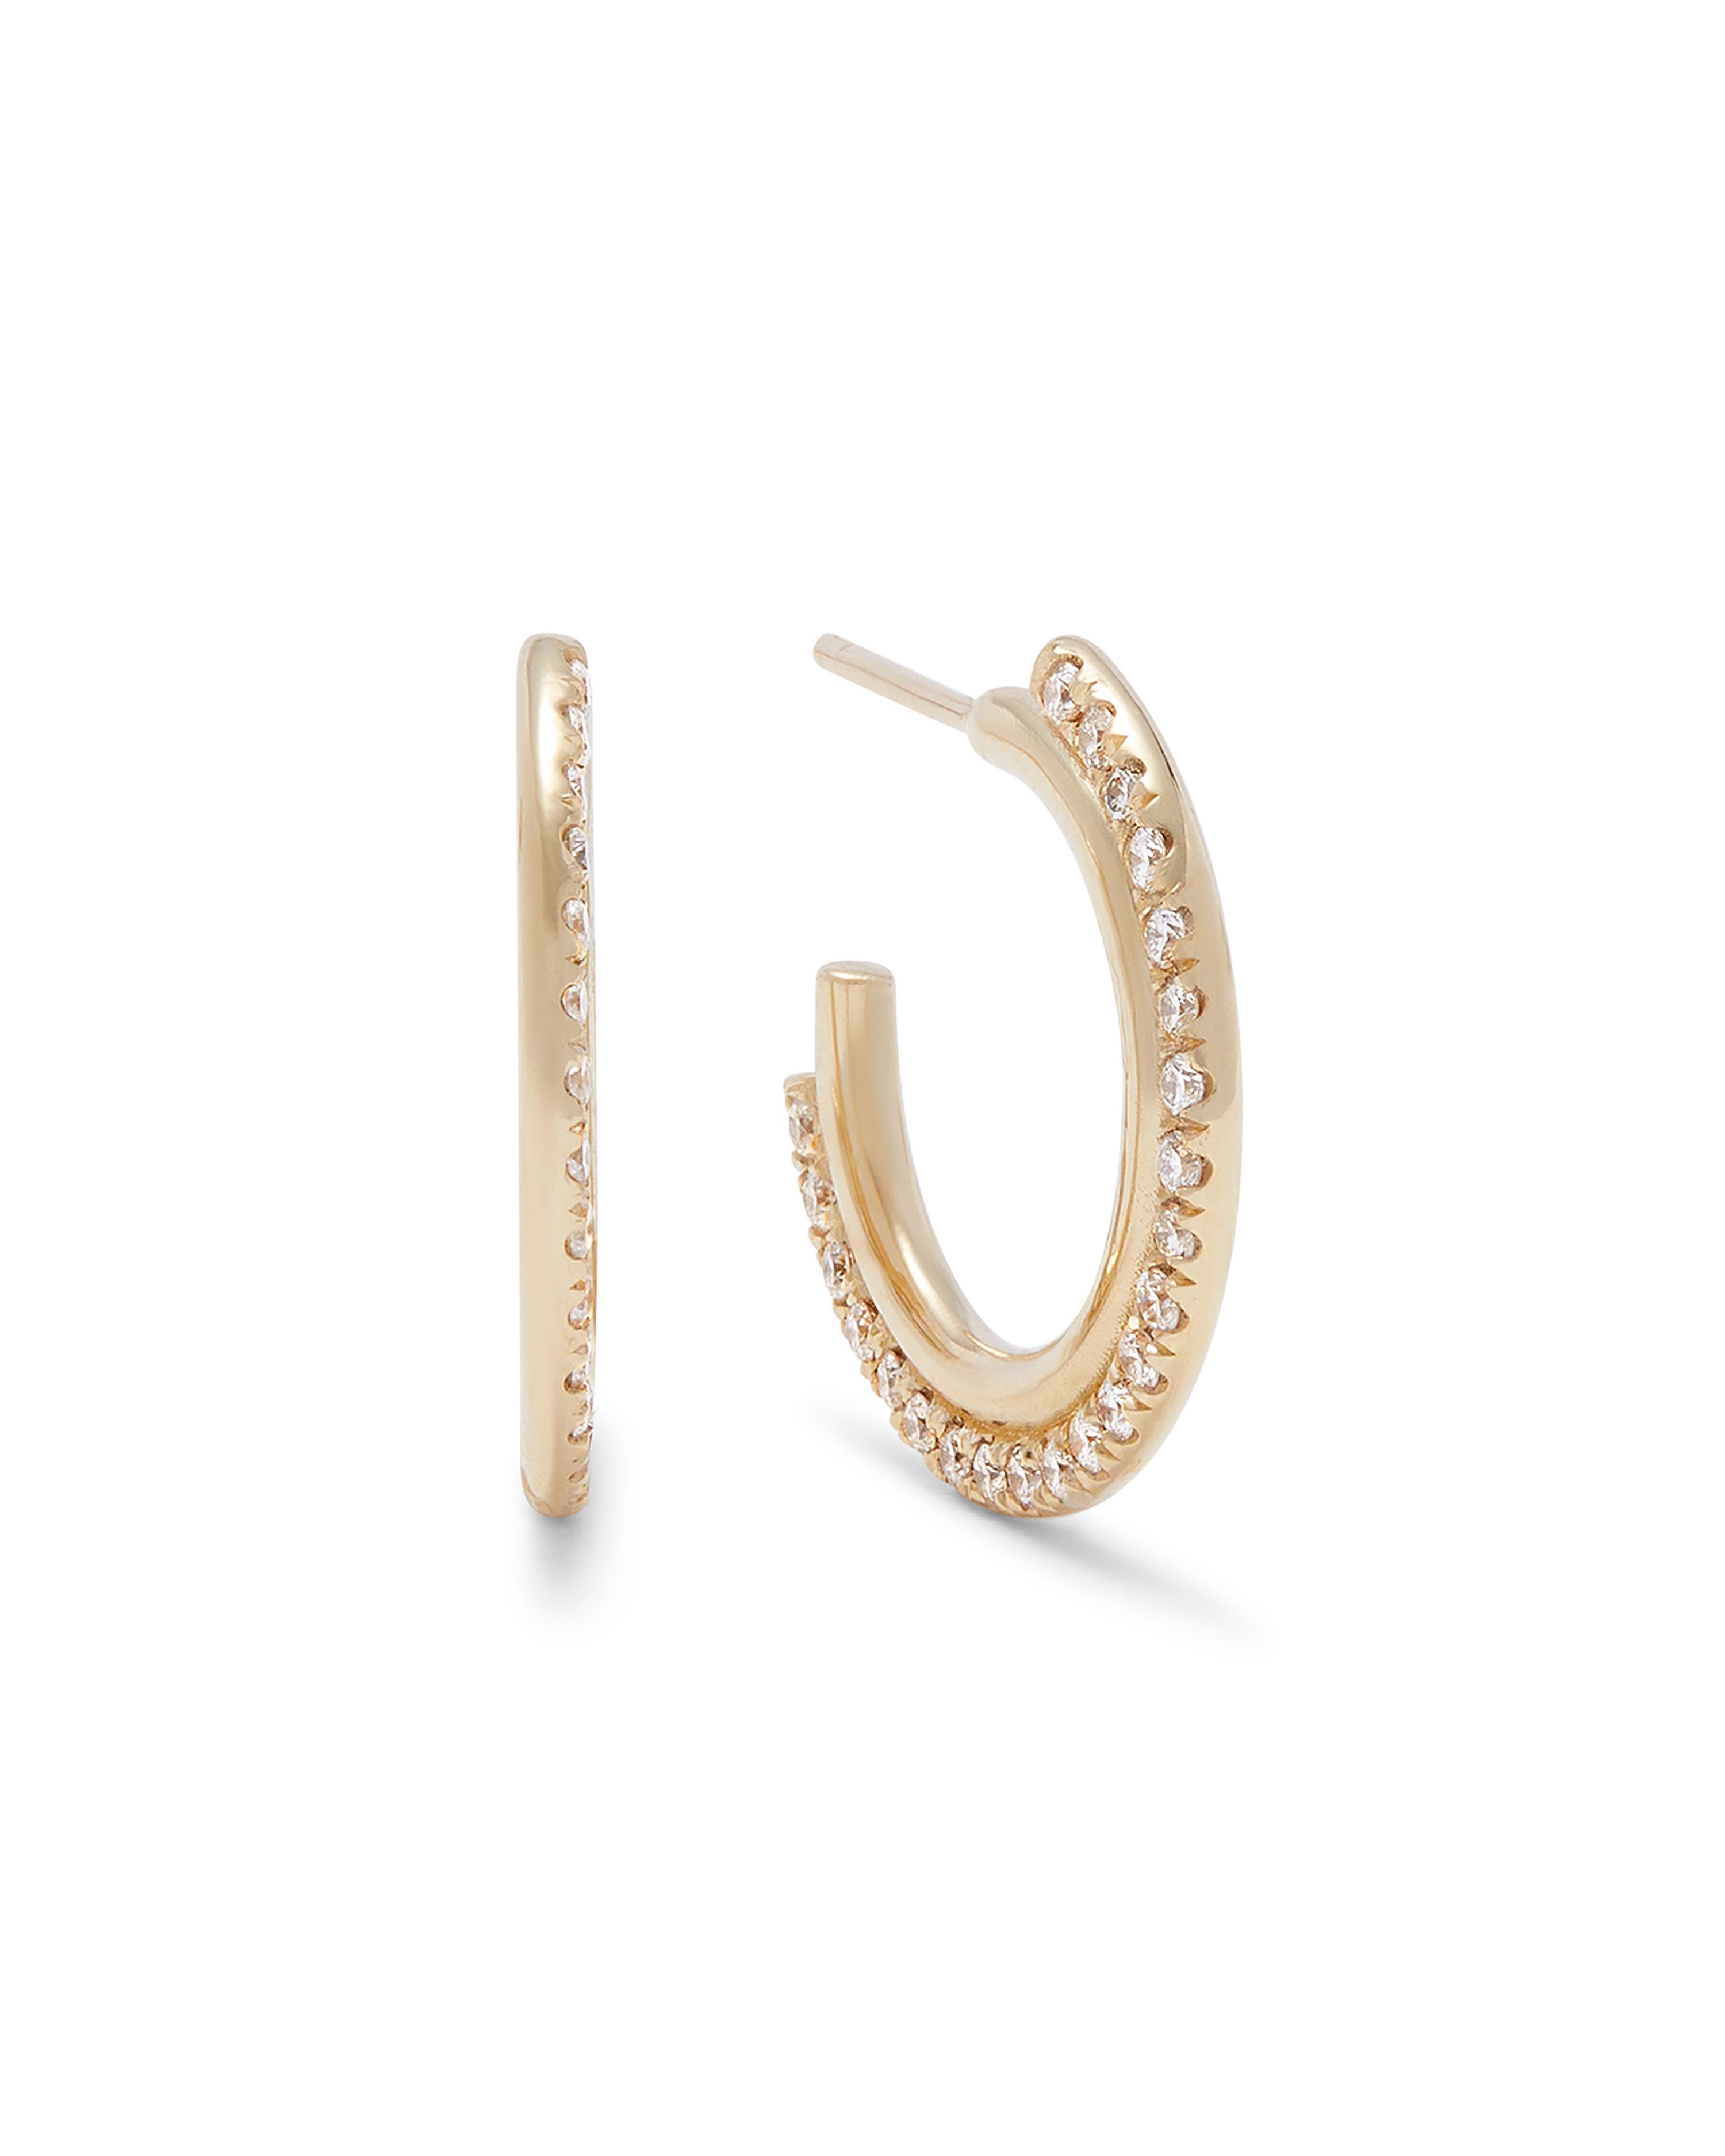 Architectural yet minimal hoop earrings in 18K yellow gold. The hoops feature a rounded band detail set with brilliant cut diamonds. Their petite size makes them ideal for every day wear while adding just the right amount of sparkle. Total diamond